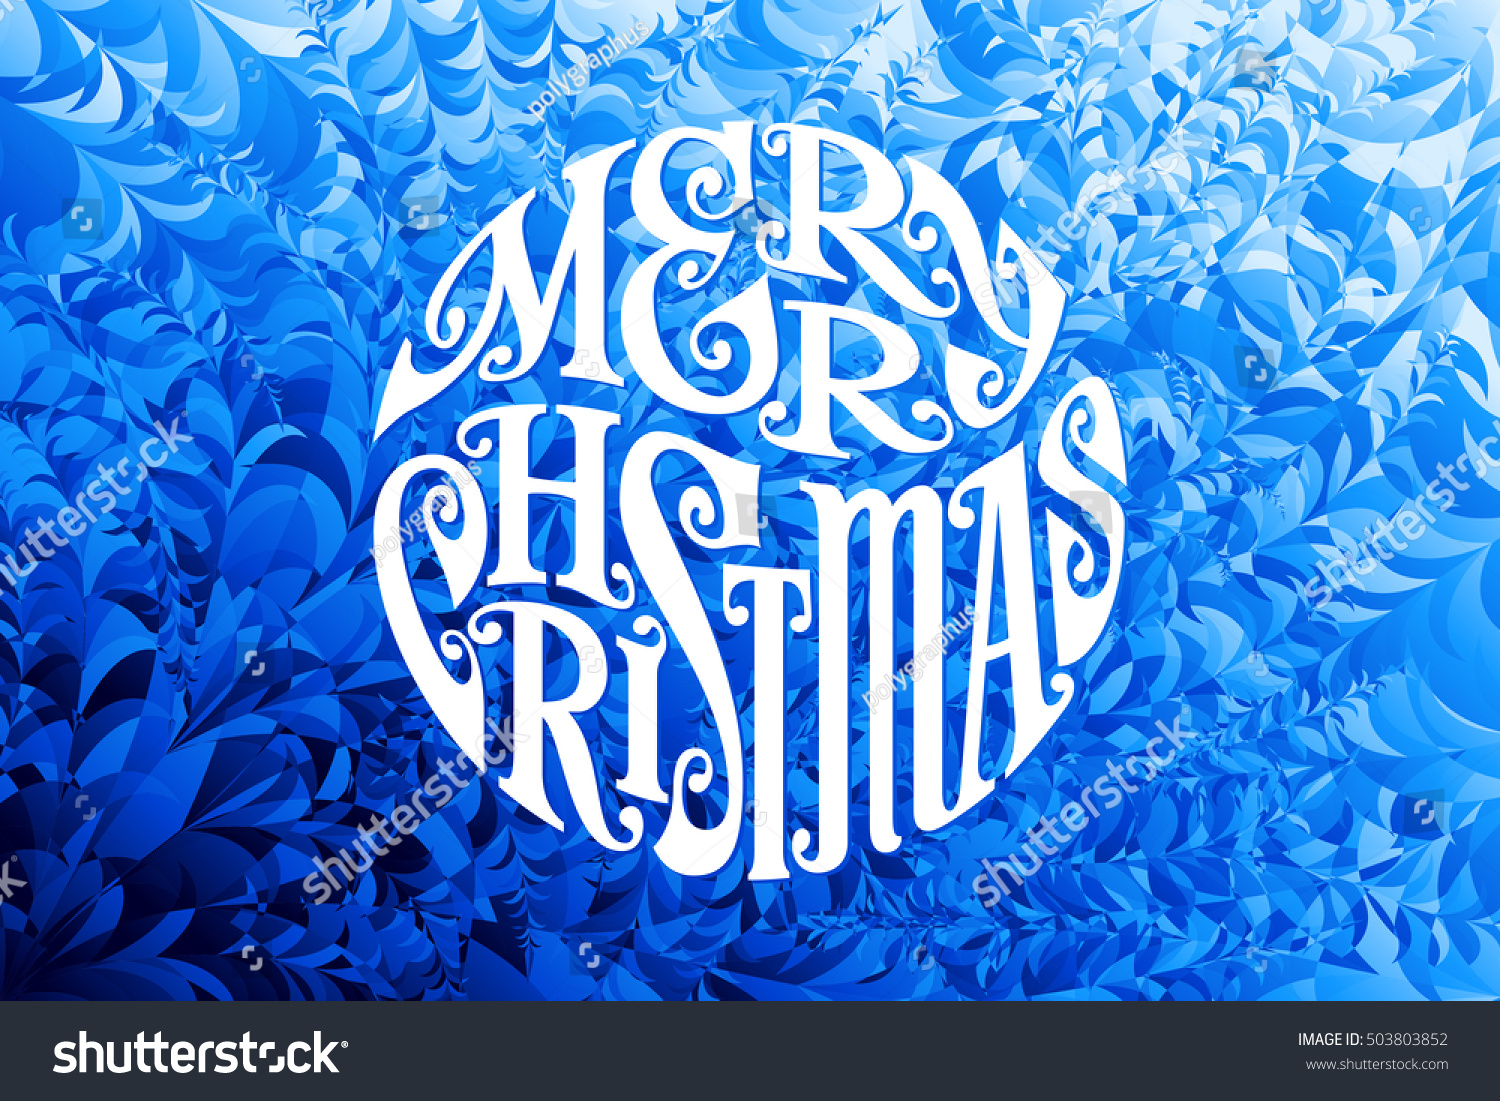 Merry Christmas and Happy New Year Lettering on ice background